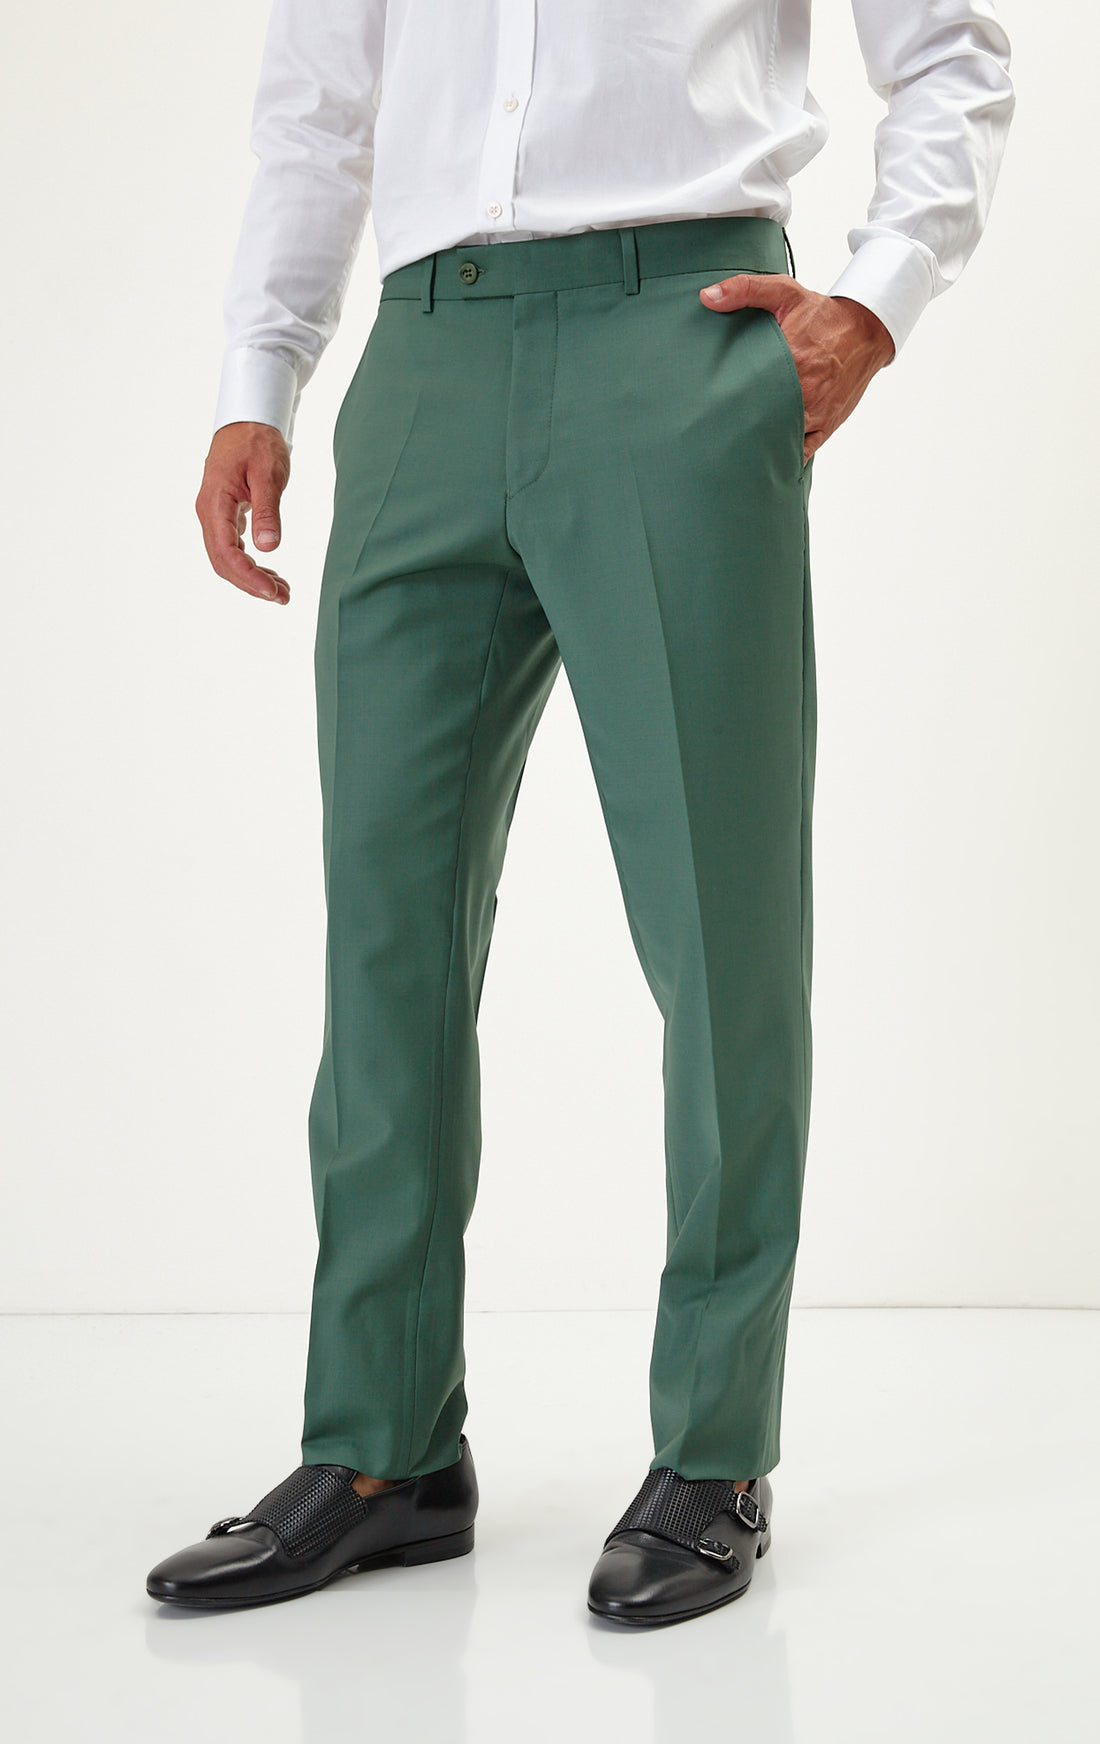 N° R206 Double Breasted Merino Wool Suit - Verdant Green - Ron Tomson